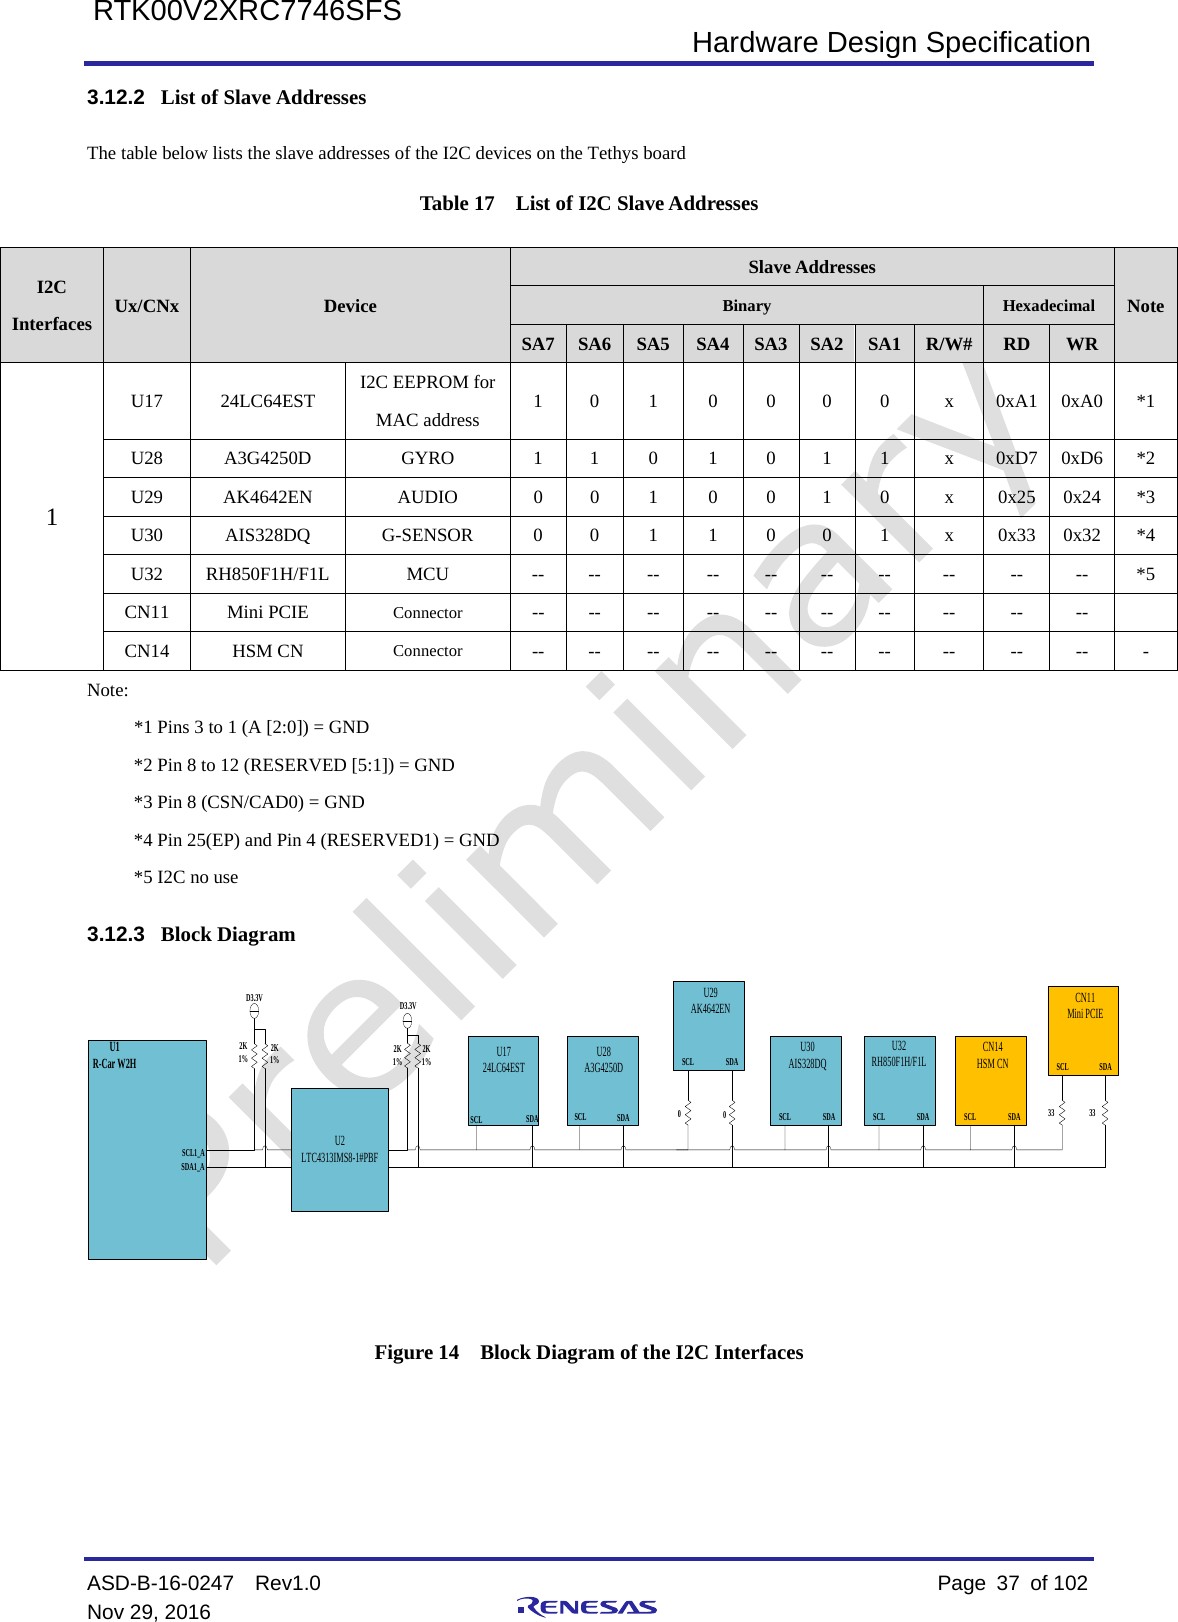  Hardware Design Specification ASD-B-16-0247  Rev1.0    Page  37 of 102 Nov 29, 2016     RTK00V2XRC7746SFS 3.12.2 List of Slave Addresses The table below lists the slave addresses of the I2C devices on the Tethys board Table 17  List of I2C Slave Addresses I2C Interfaces Ux/CNx Device Slave Addresses Note Binary Hexadecimal SA7 SA6 SA5 SA4 SA3 SA2 SA1 R/W# RD  WR 1 U17  24LC64EST  I2C EEPROM for MAC address 1  0  1  0  0  0  0  x  0xA1  0xA0  *1 U28  A3G4250D  GYRO  1  1  0  1  0  1  1  x  0xD7  0xD6  *2 U29  AK4642EN  AUDIO  0  0  1  0  0  1  0  x  0x25  0x24  *3 U30  AIS328DQ  G-SENSOR  0  0  1  1  0  0  1  x  0x33  0x32  *4 U32  RH850F1H/F1L  MCU  --  --  --  --  --  --  --  --  --  --  *5 CN11  Mini PCIE Connector --  --  --  --  --  --  --  --  --  --   CN14  HSM CN Connector --  --  --  --  --  --  --  --  --  --  - Note:      *1 Pins 3 to 1 (A [2:0]) = GND      *2 Pin 8 to 12 (RESERVED [5:1]) = GND      *3 Pin 8 (CSN/CAD0) = GND      *4 Pin 25(EP) and Pin 4 (RESERVED1) = GND      *5 I2C no use 3.12.3 Block Diagram U2LTC4313IMS8-1#PBFU1R-Car W2HSCL1_ASDA1_ASCL SDAU1724LC64ESTSCL SDAU28A3G4250DU29AK4642ENSCL SDAU30AIS328DQSCL SDAU32RH850F1H/F1LSCL SDACN14HSM CNSCL SDACN11Mini PCIESCL SDA0033 332K 1% 2K 1% 2K 1% 2K 1%D3.3V D3.3V Figure 14  Block Diagram of the I2C Interfaces   